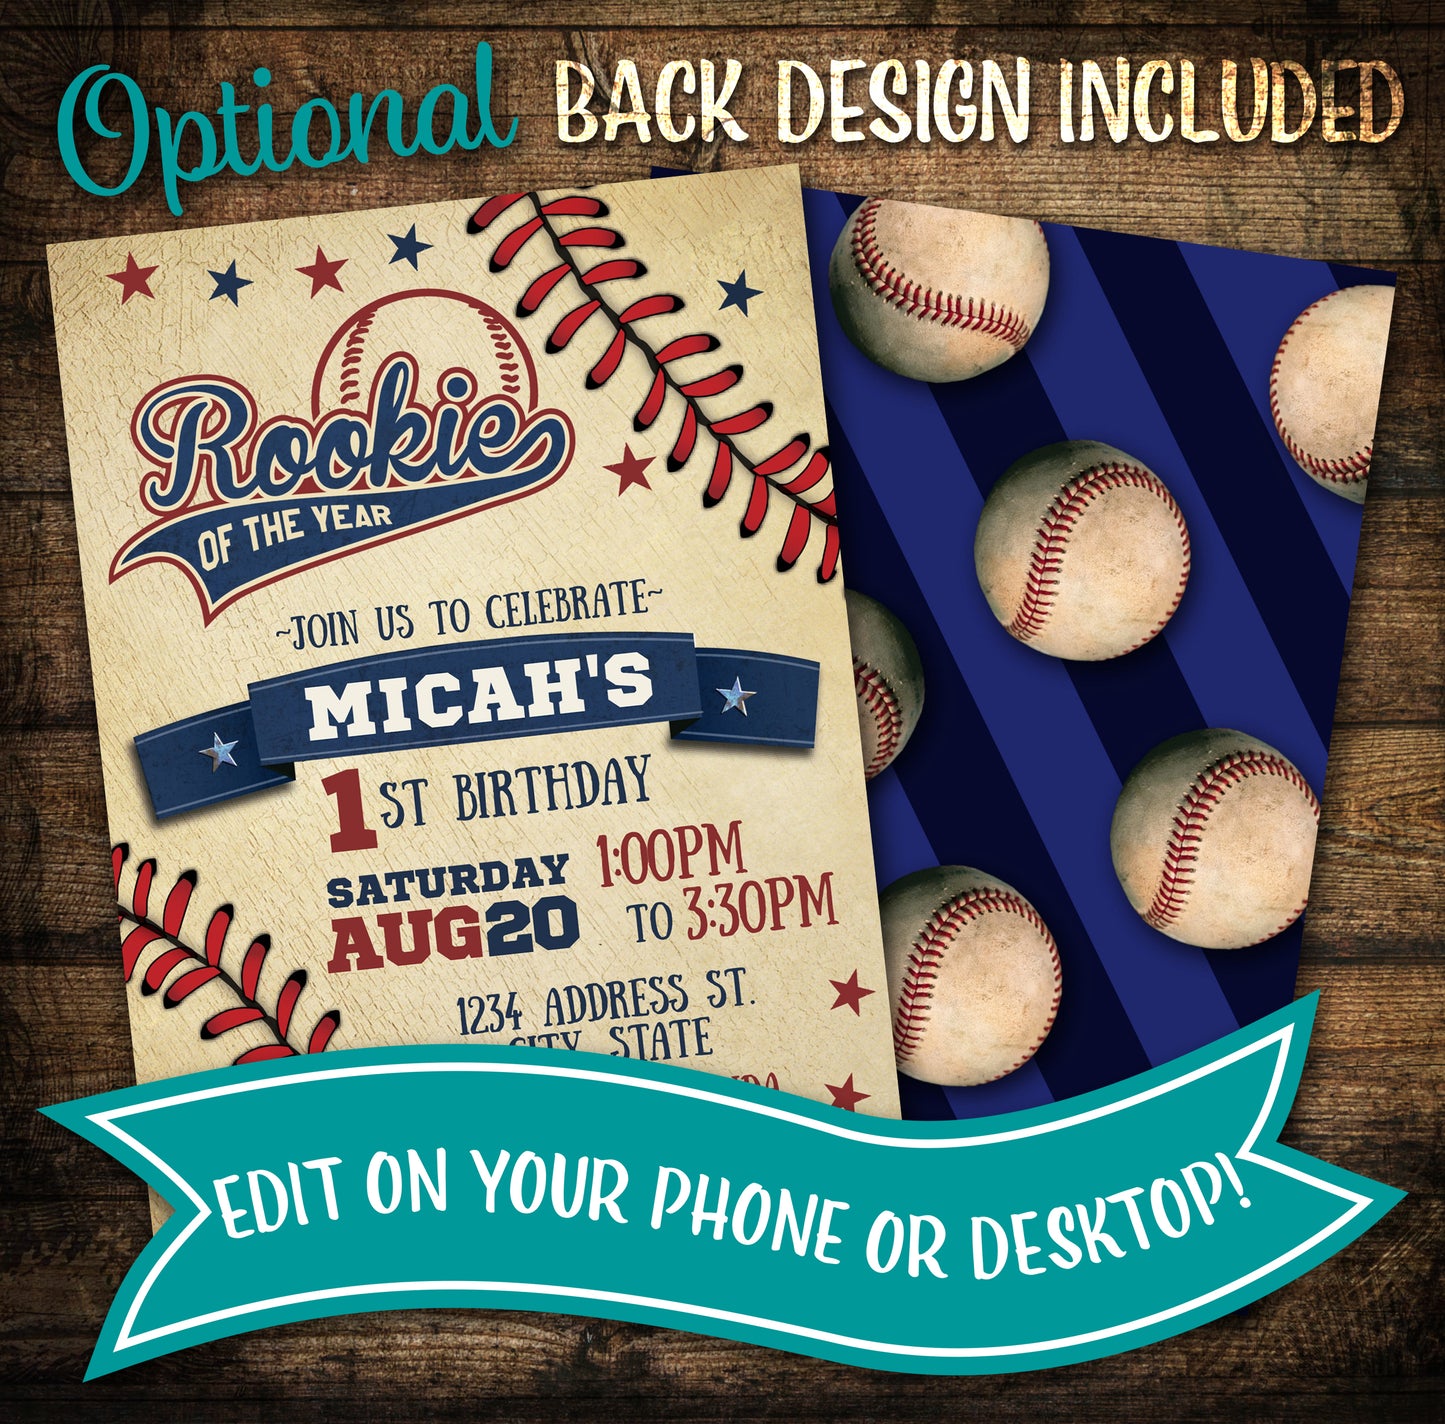 Rookie of the year baseball birthday invitation with back design